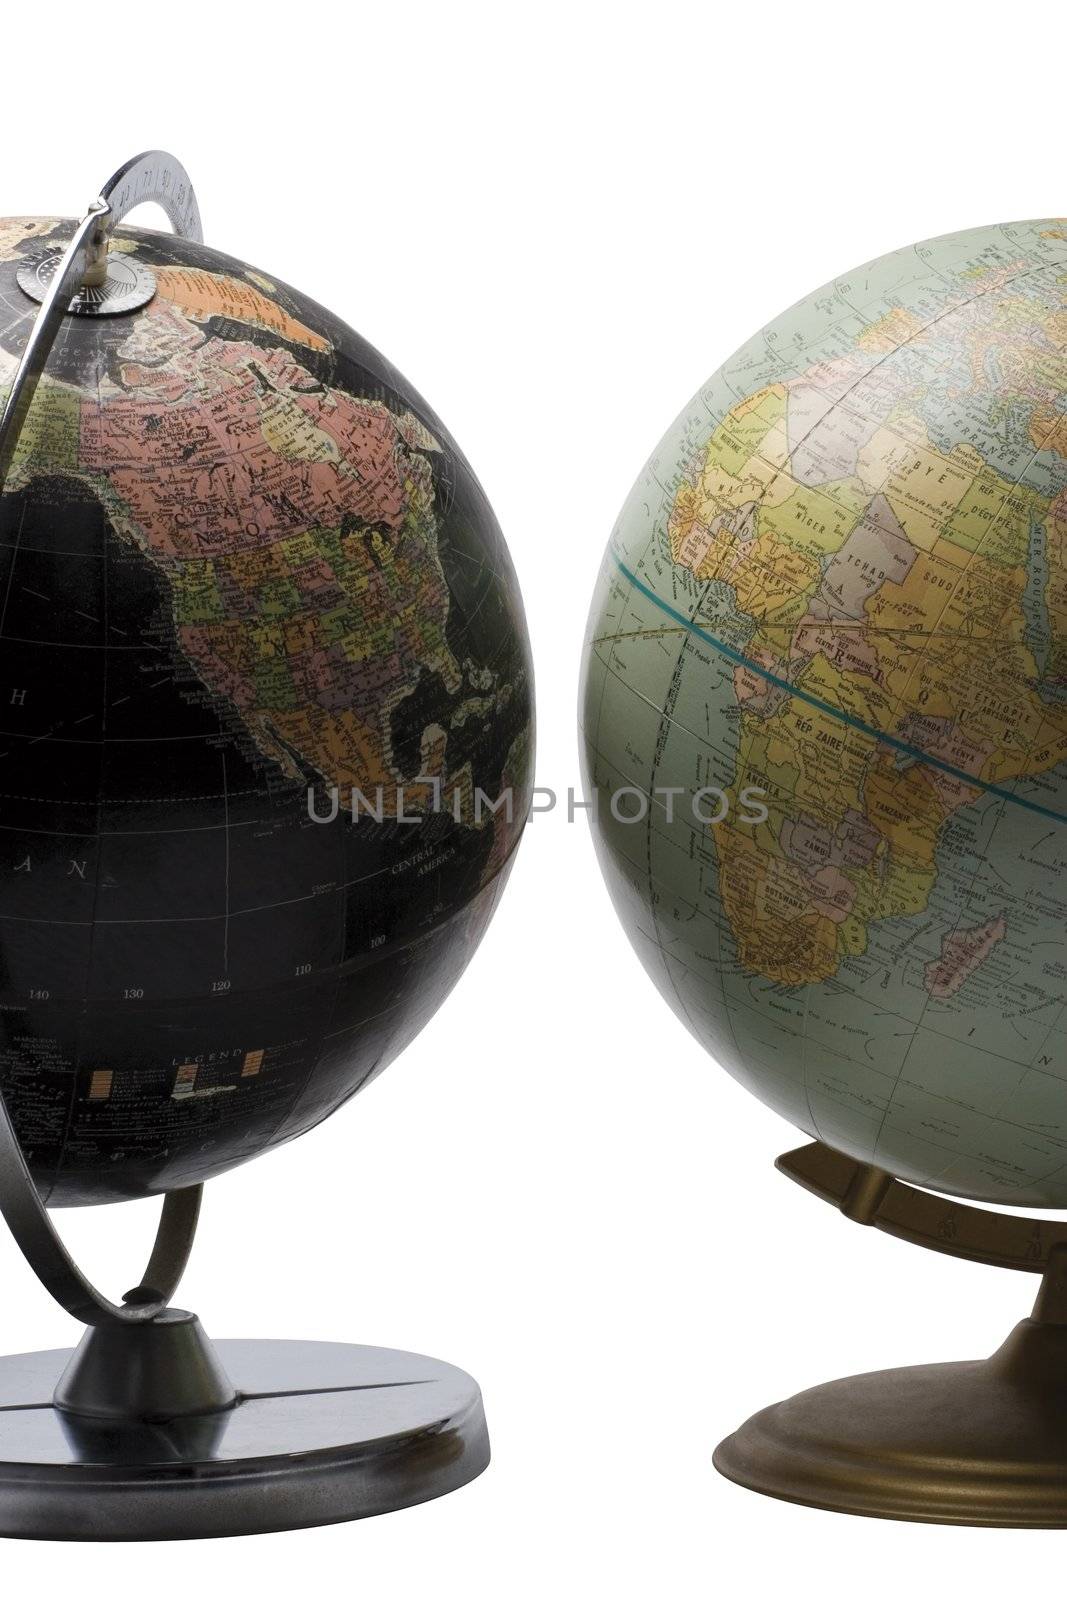 Terrestrial globe in black color showing the american continent facing a blue globe showing the african continent